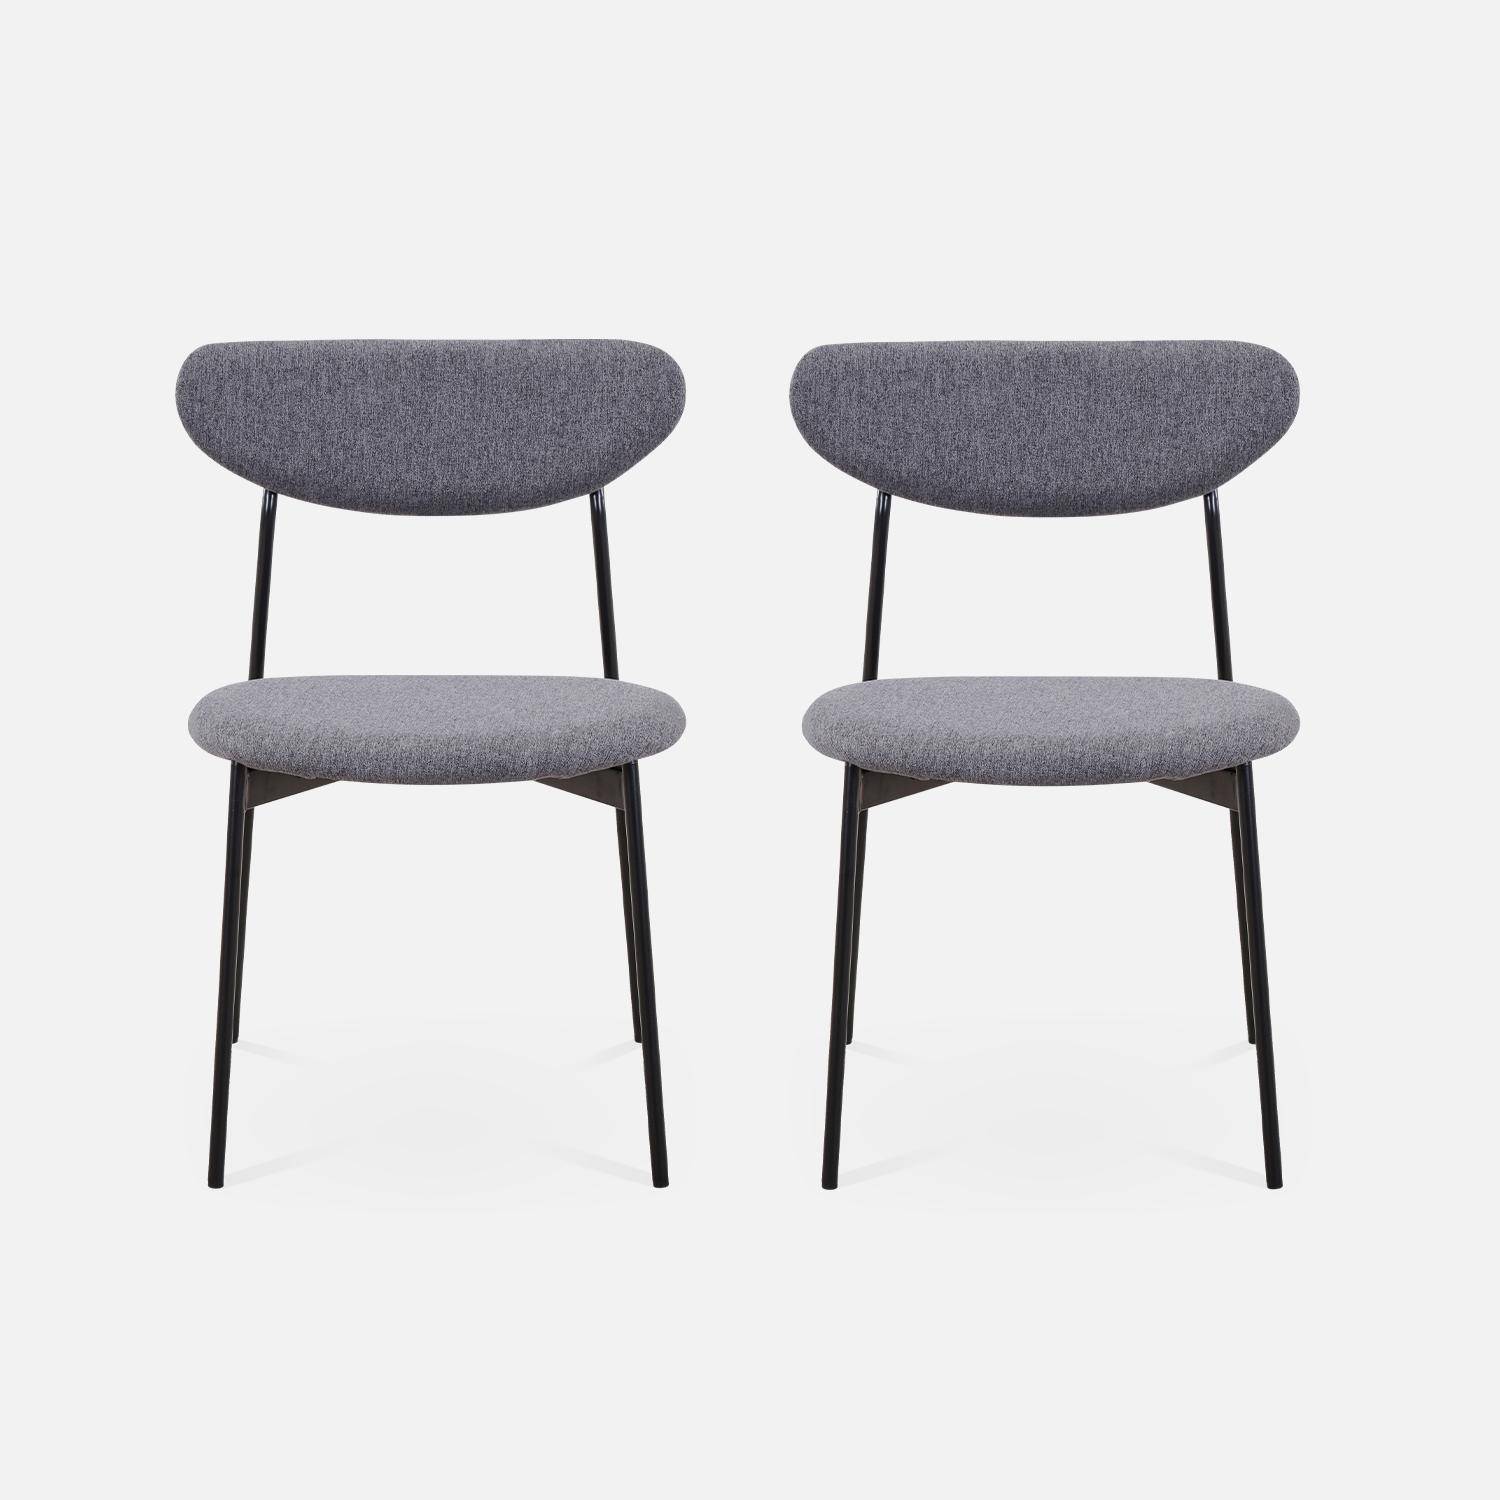 Set of 2 retro style dining chairs with steel legs - Arty - Dark Grey Photo4